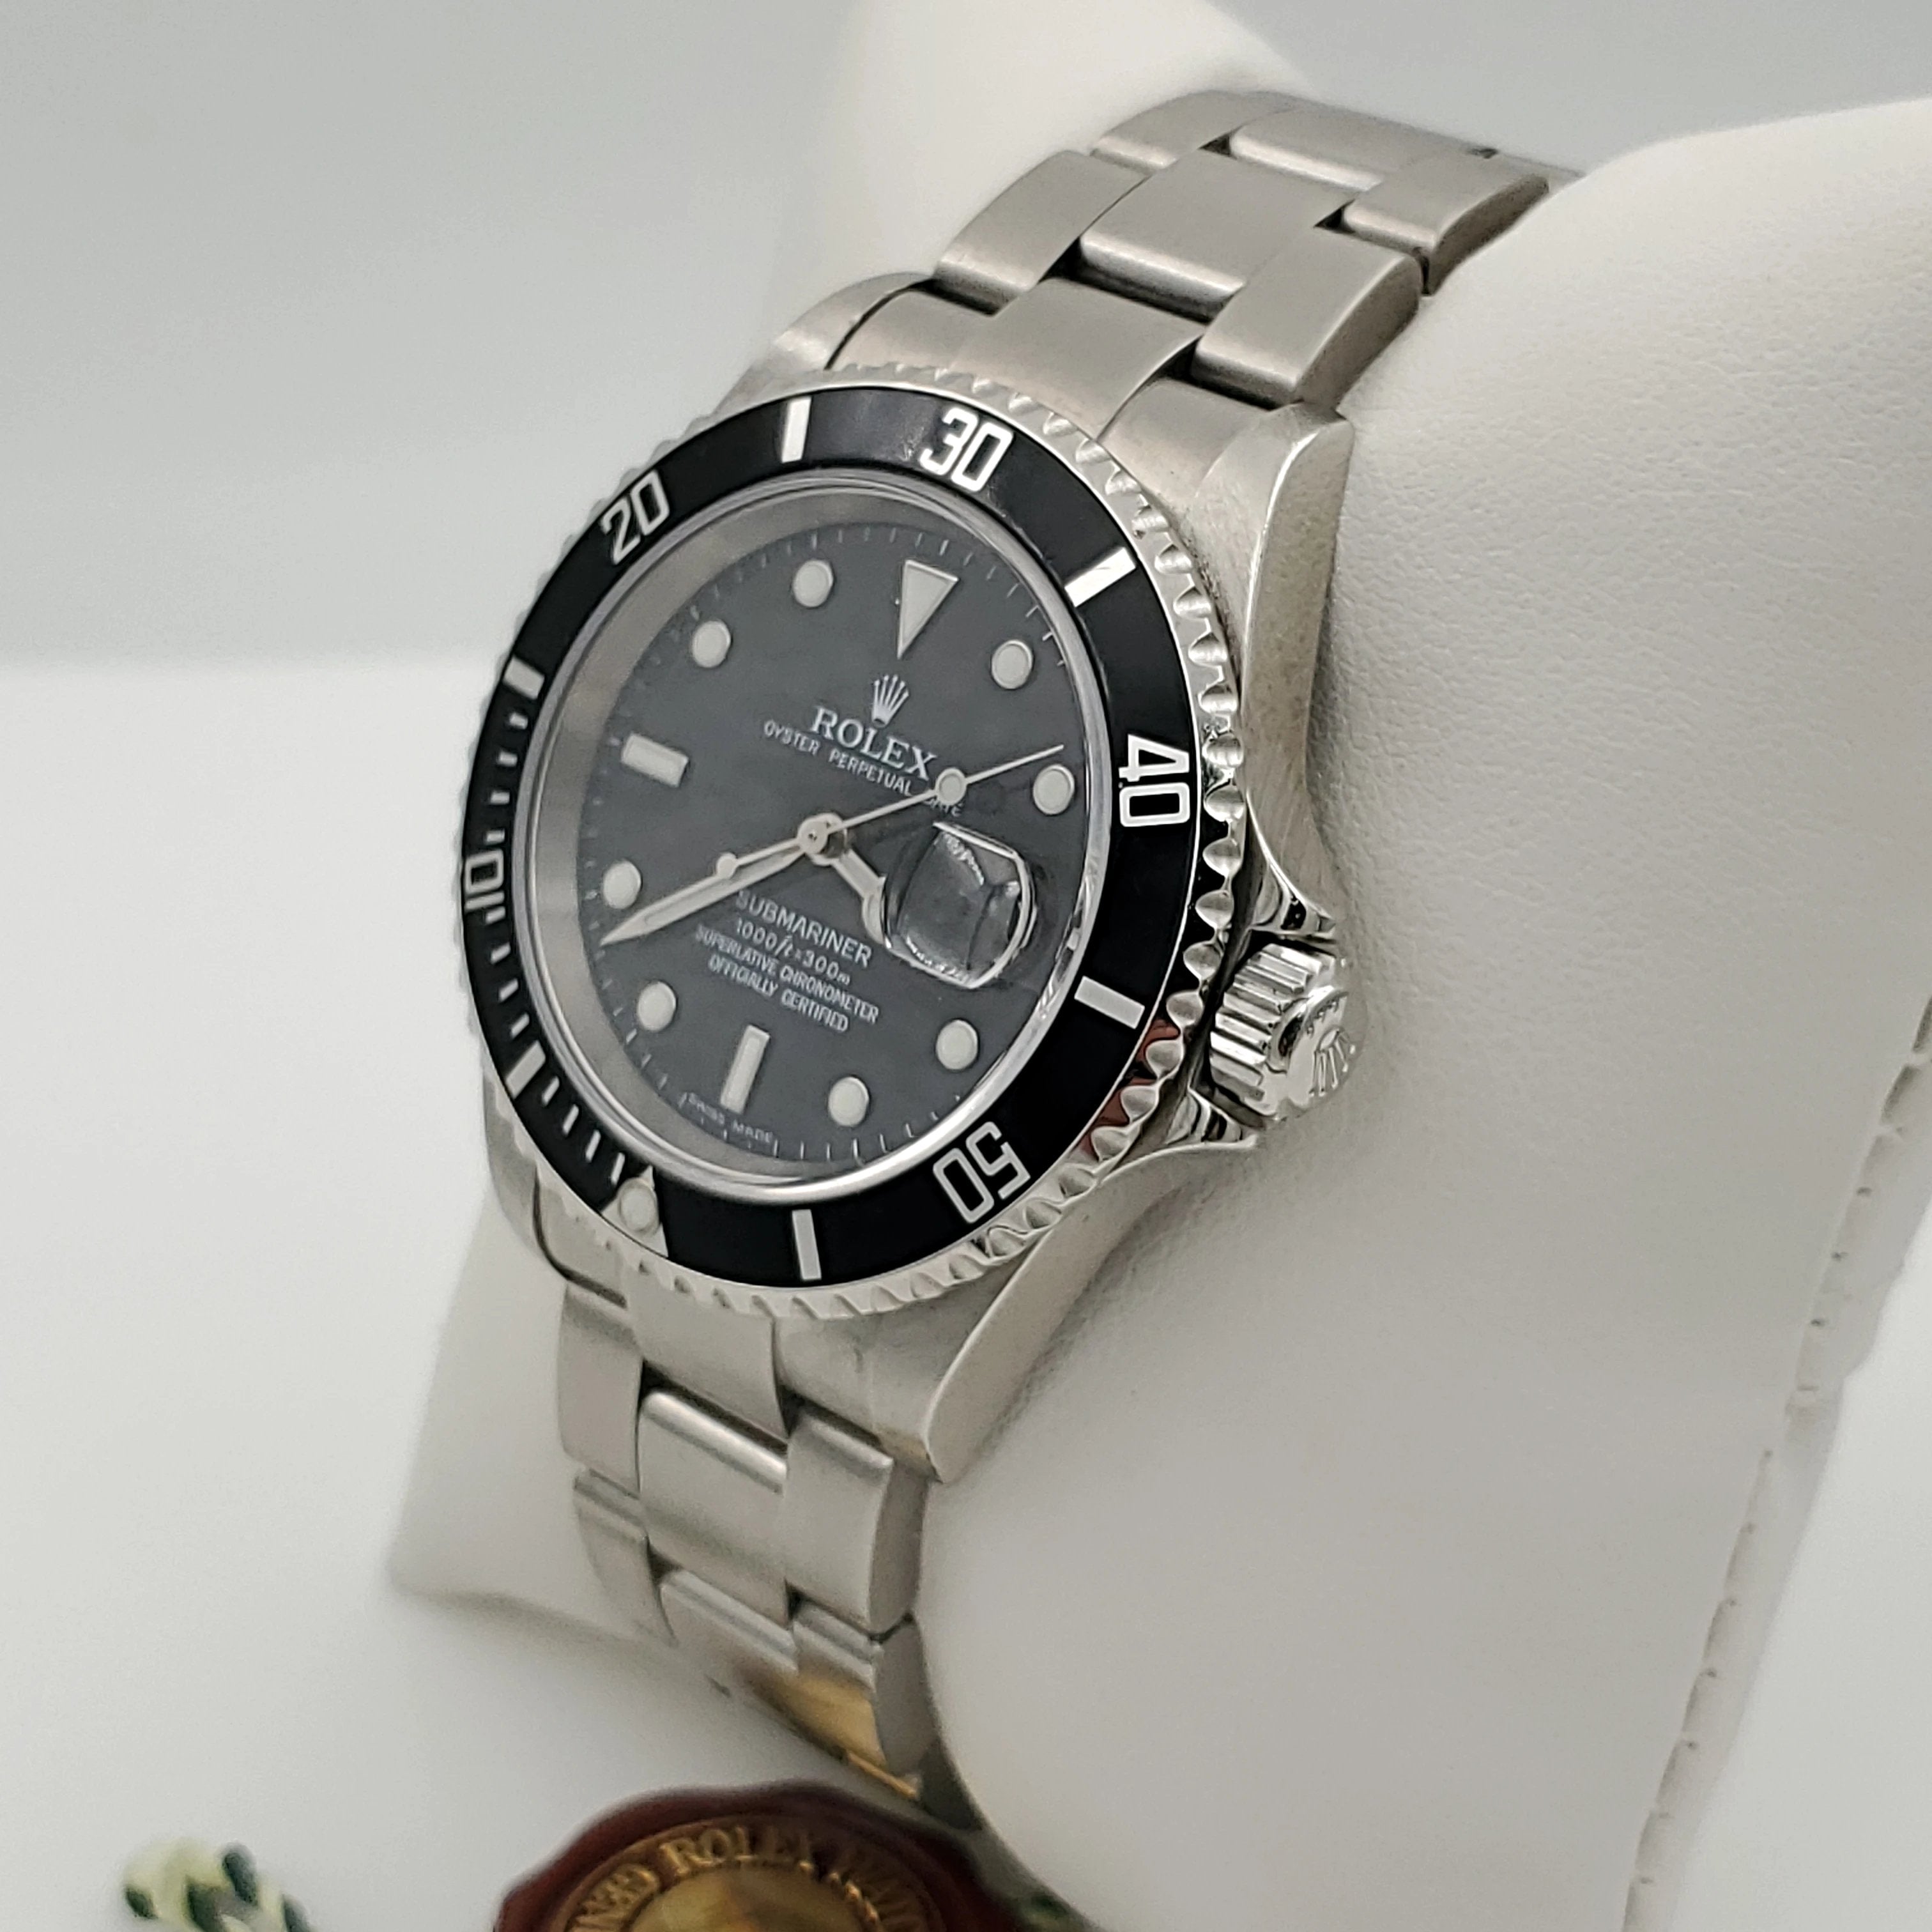 Men's Rolex 40mm Submariner Date 16610 Oyster Perpetual Stainless Steel Watch with Black Dial and Black Bezel. (Pre-Owned)